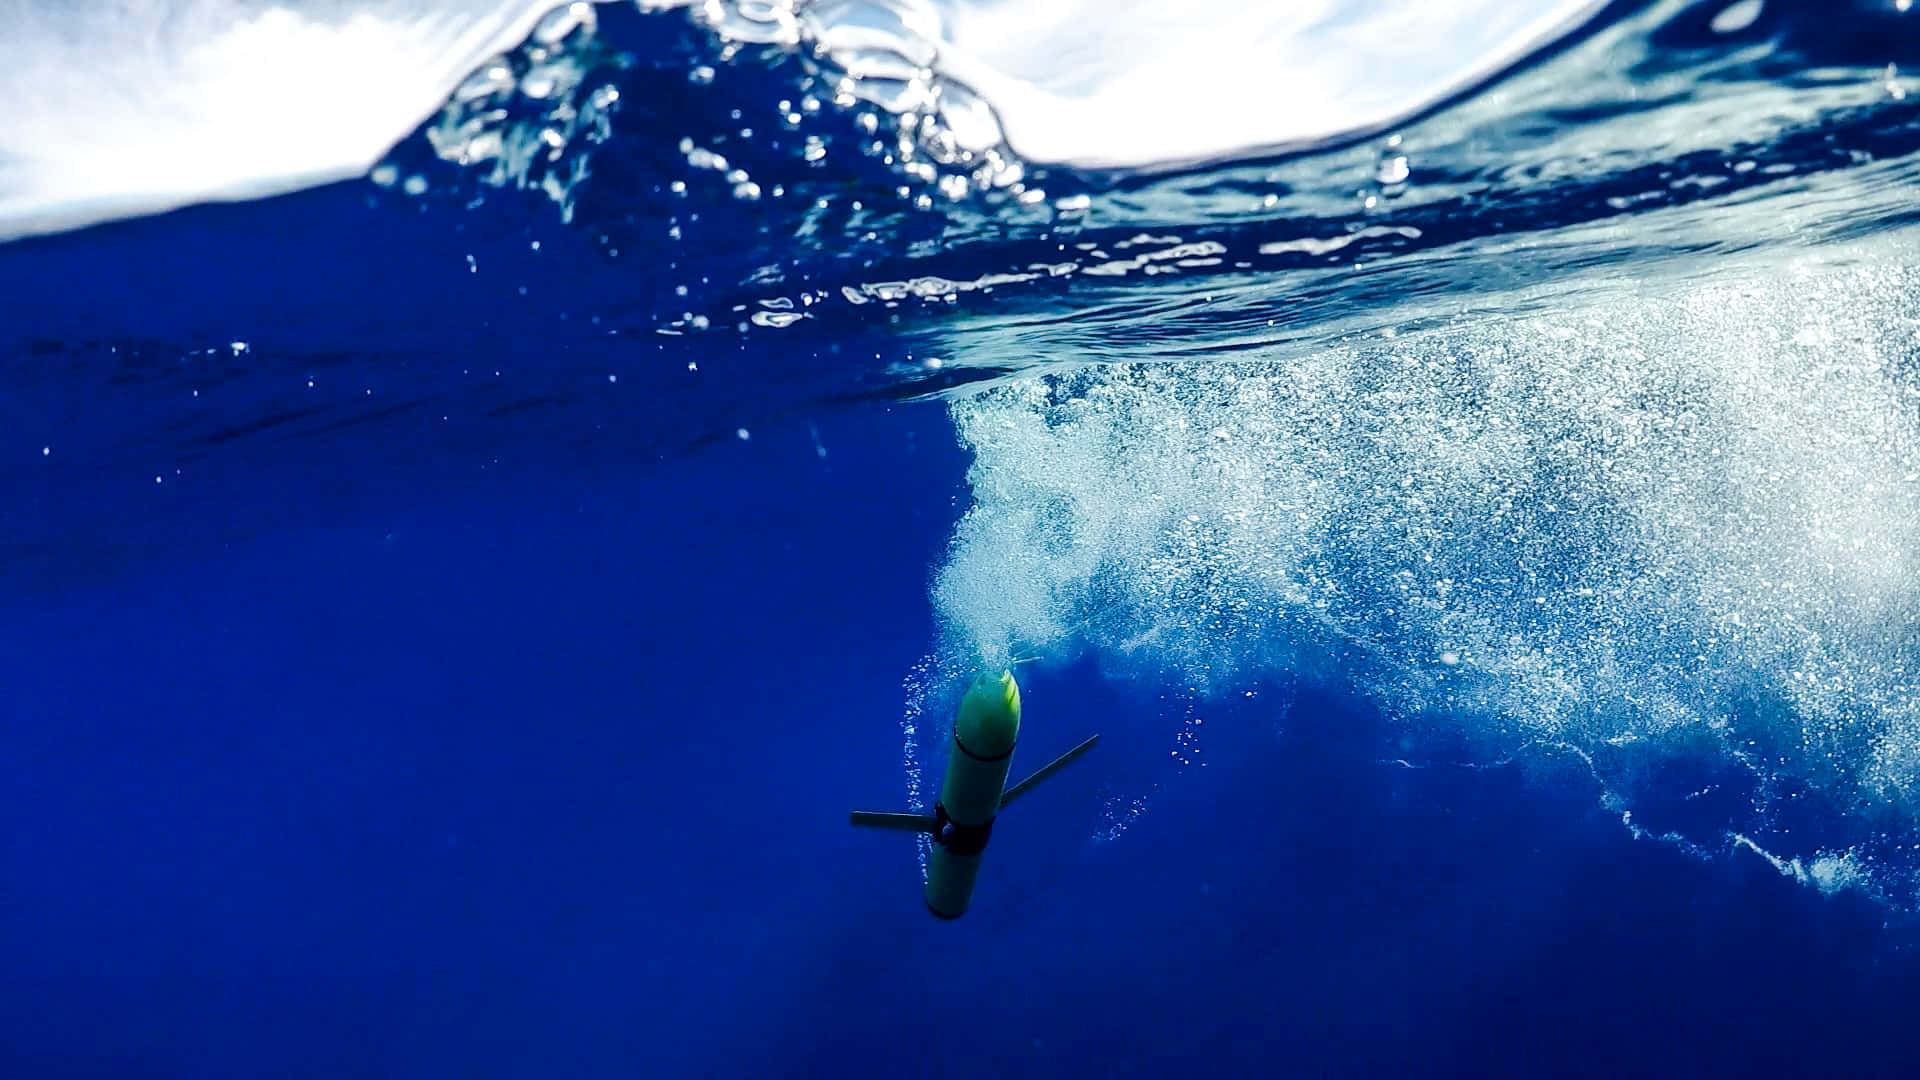 Scary Ocean Underwater Missile Picture 1920 x 1080 Picture